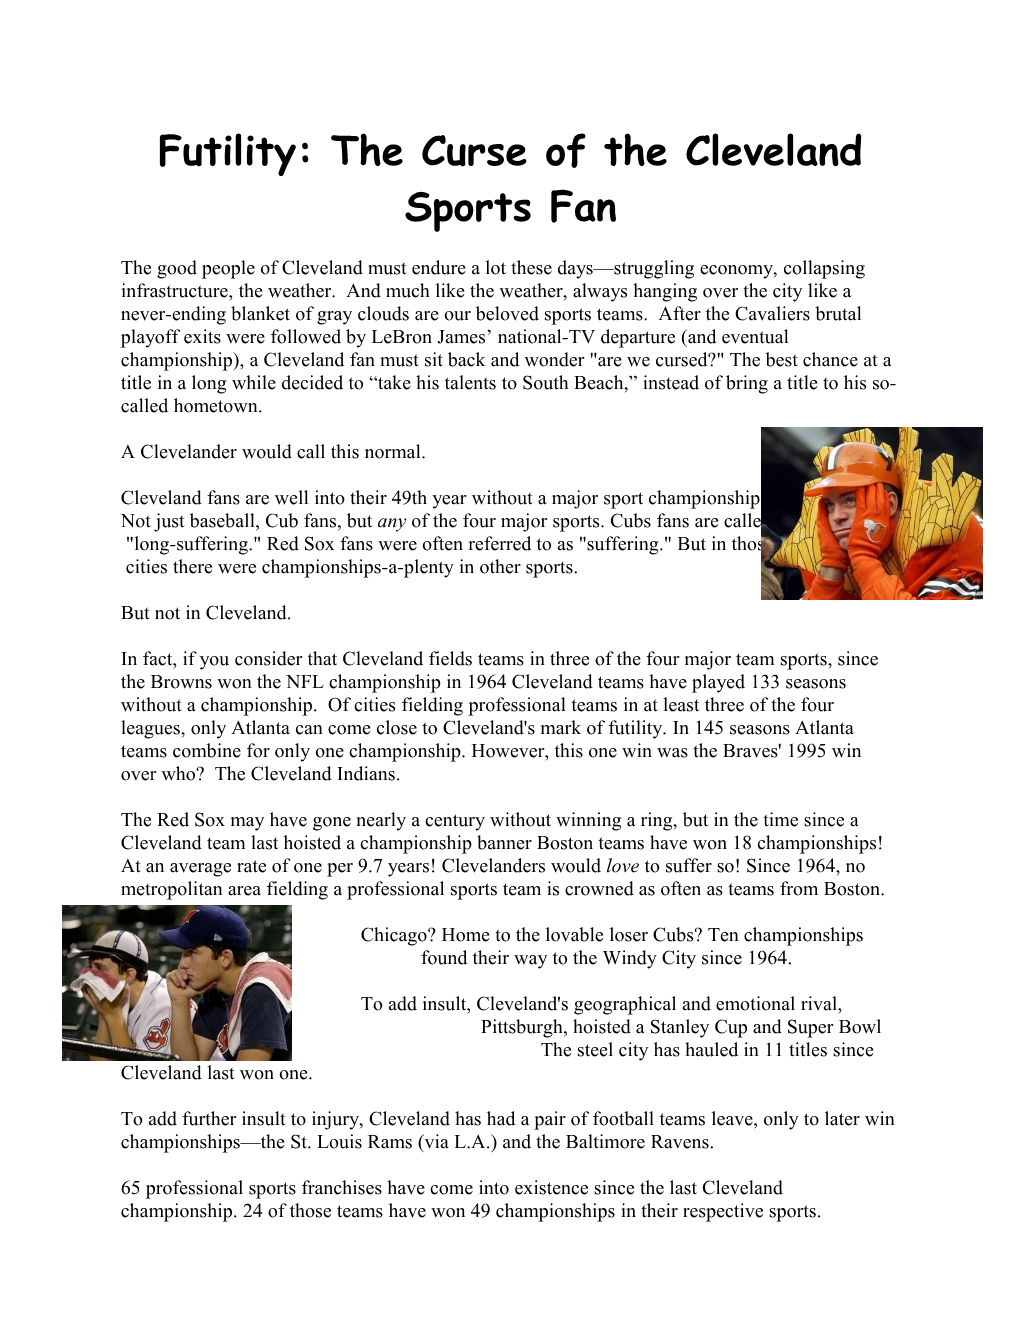 Futility: the Curse of the Cleveland Sports Fan